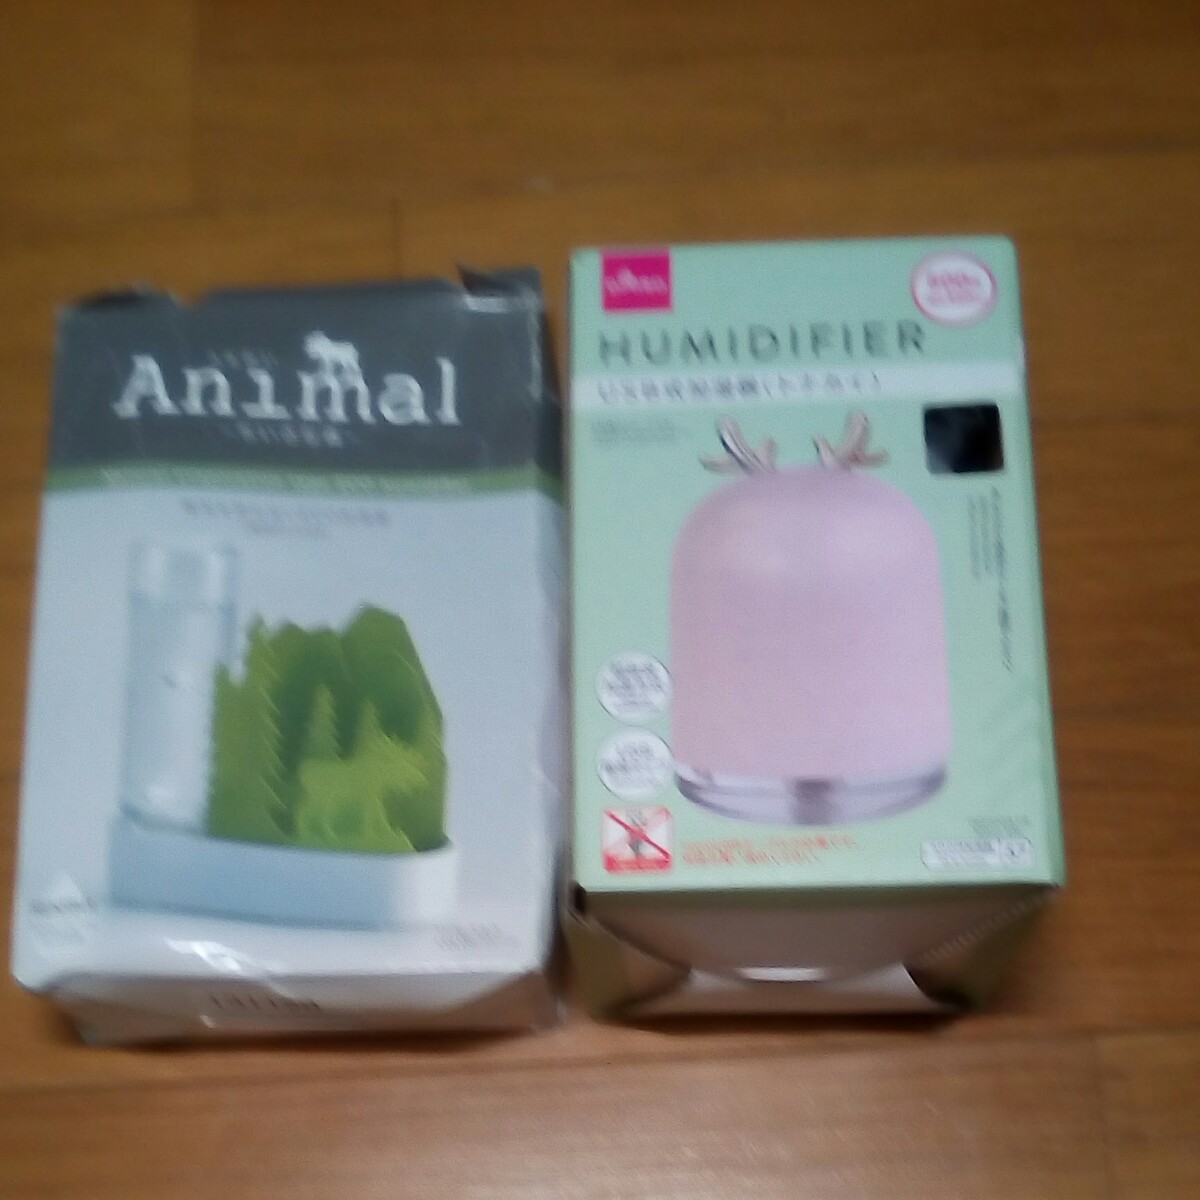  Sekisui nature evaporation type ECO humidifier ........ forest ULT-EL-GR( elk green ) for exchange filter & Daiso USB type humidifier reindeer white LED light 